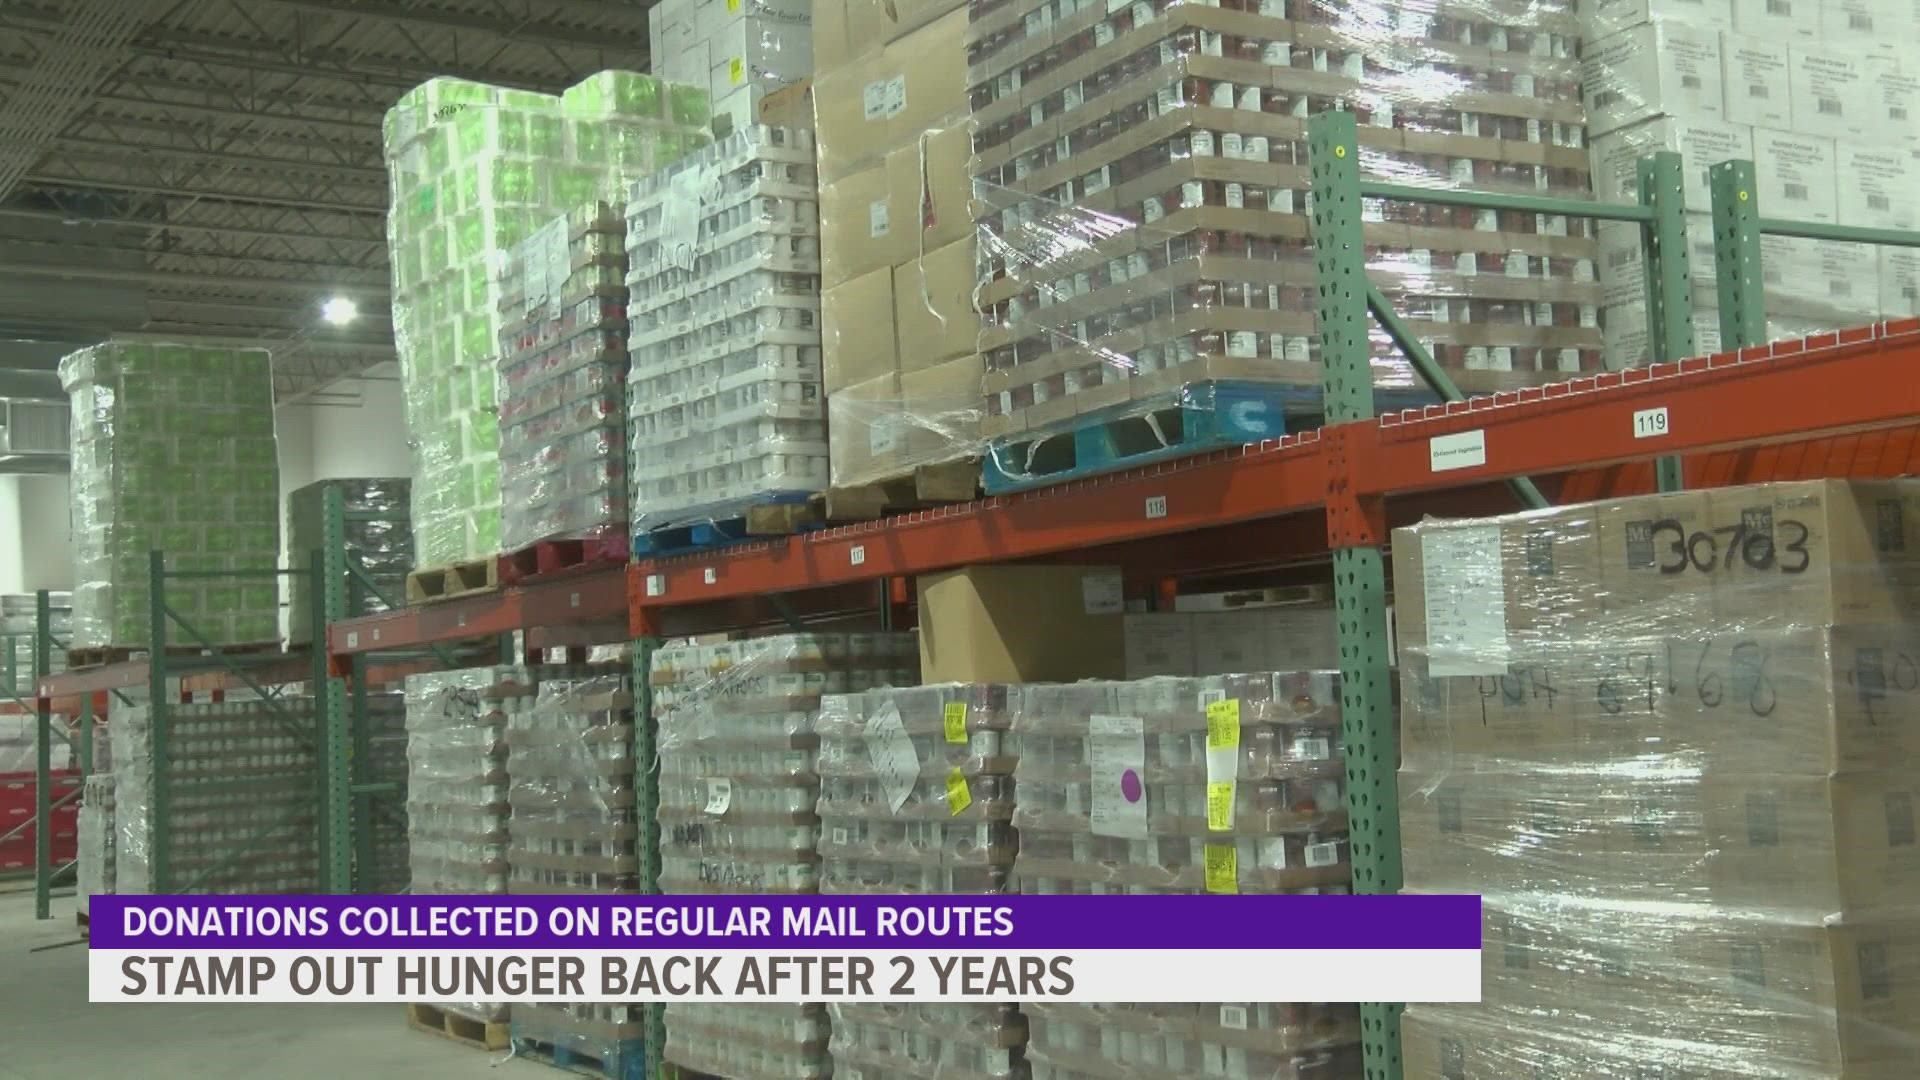 The last time the drive was held in 2019, DMARC received over 66,000 pounds of food.